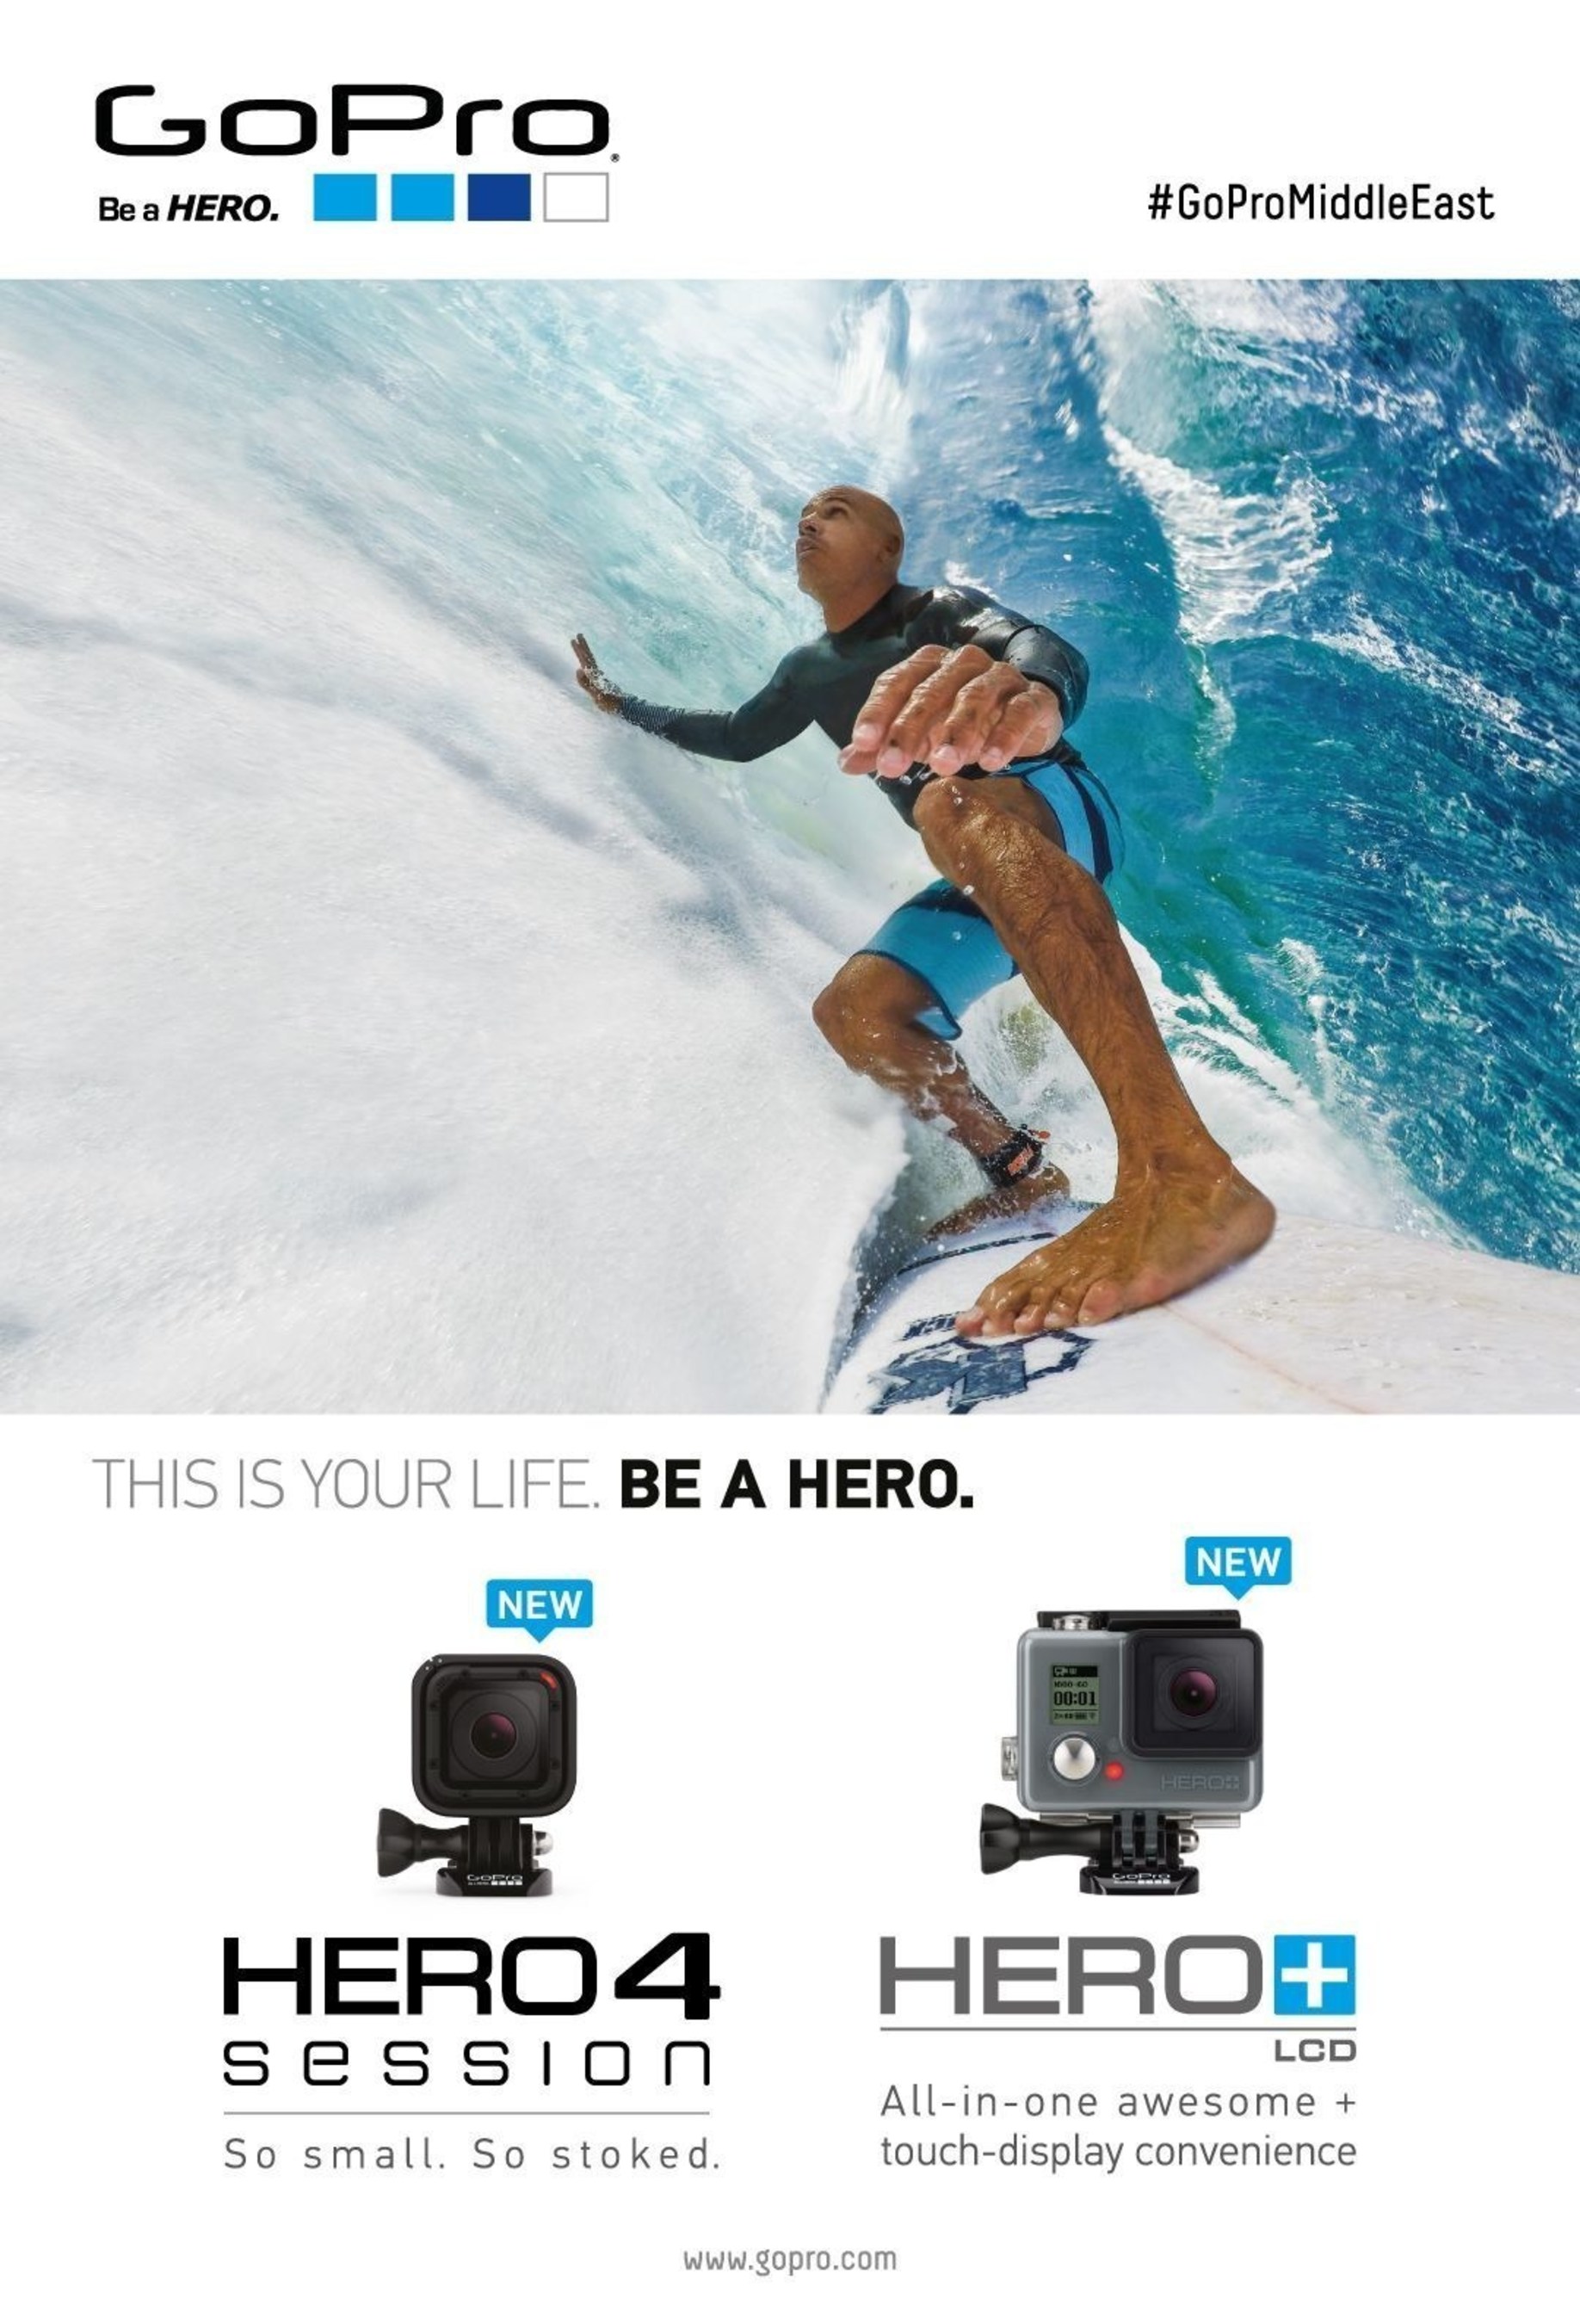 Al Boom Marine Announce the Arrival of GoPro HERO4 Session and HERO+LCD in the Middle East (PRNewsFoto/Al Boom Marine) (PRNewsFoto/Al Boom Marine)